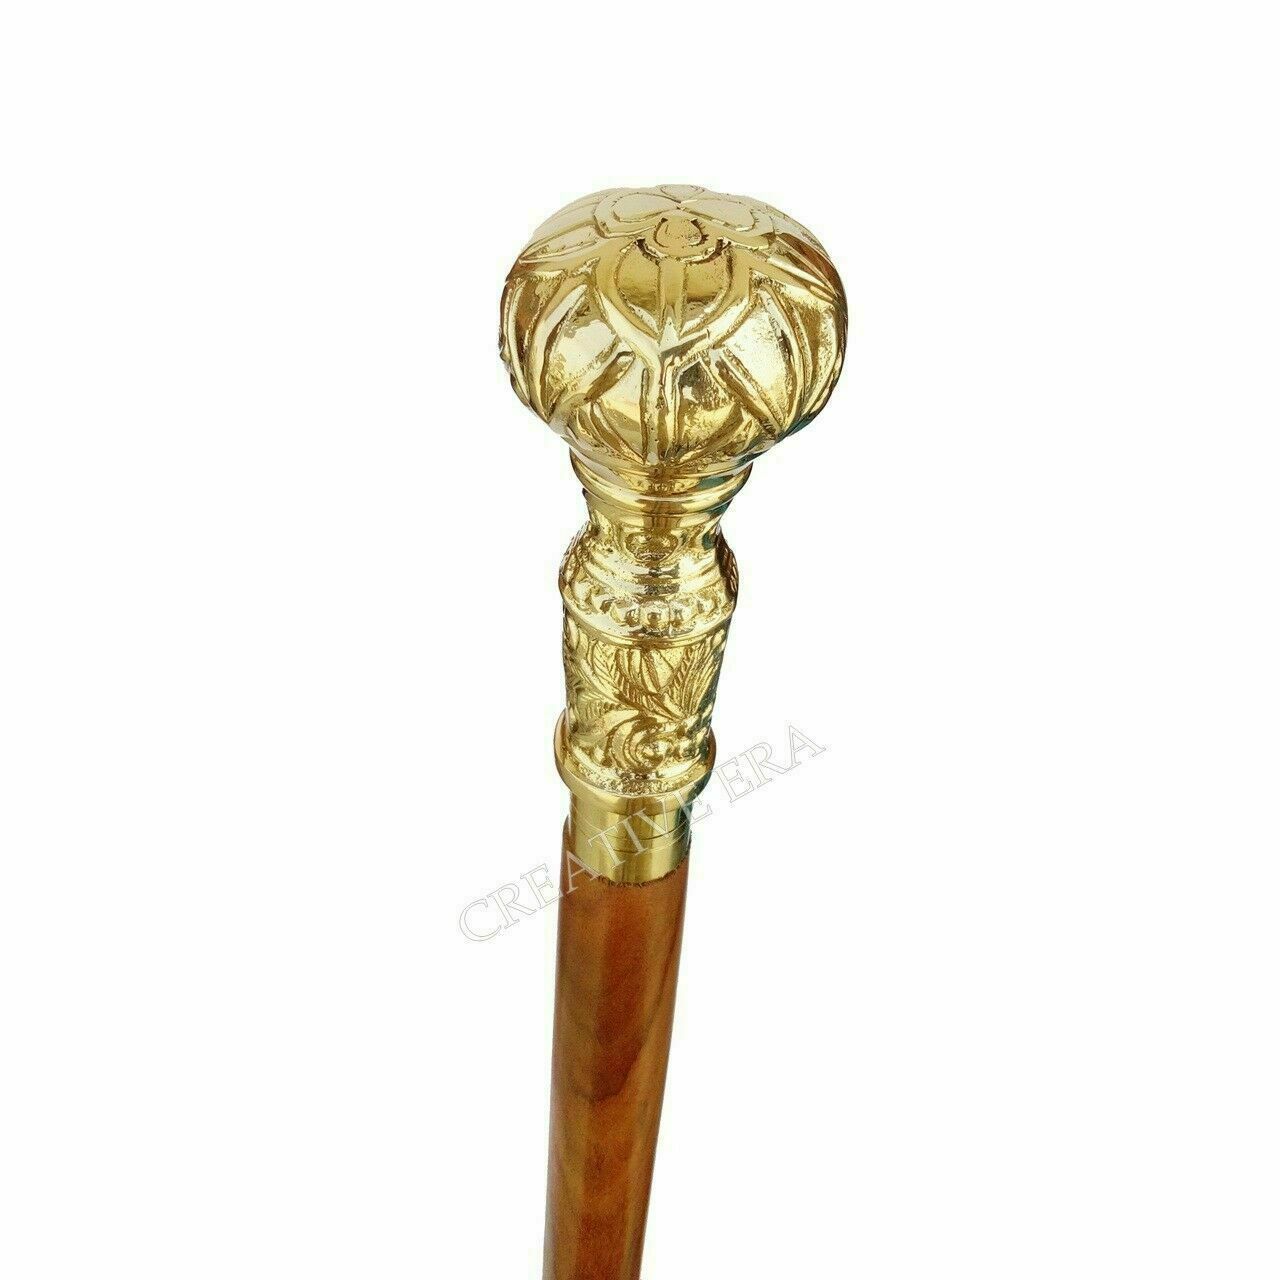 Vintage Solid Brass antique Fish Head Handle Wooden Walking Stick Cane 36" gift